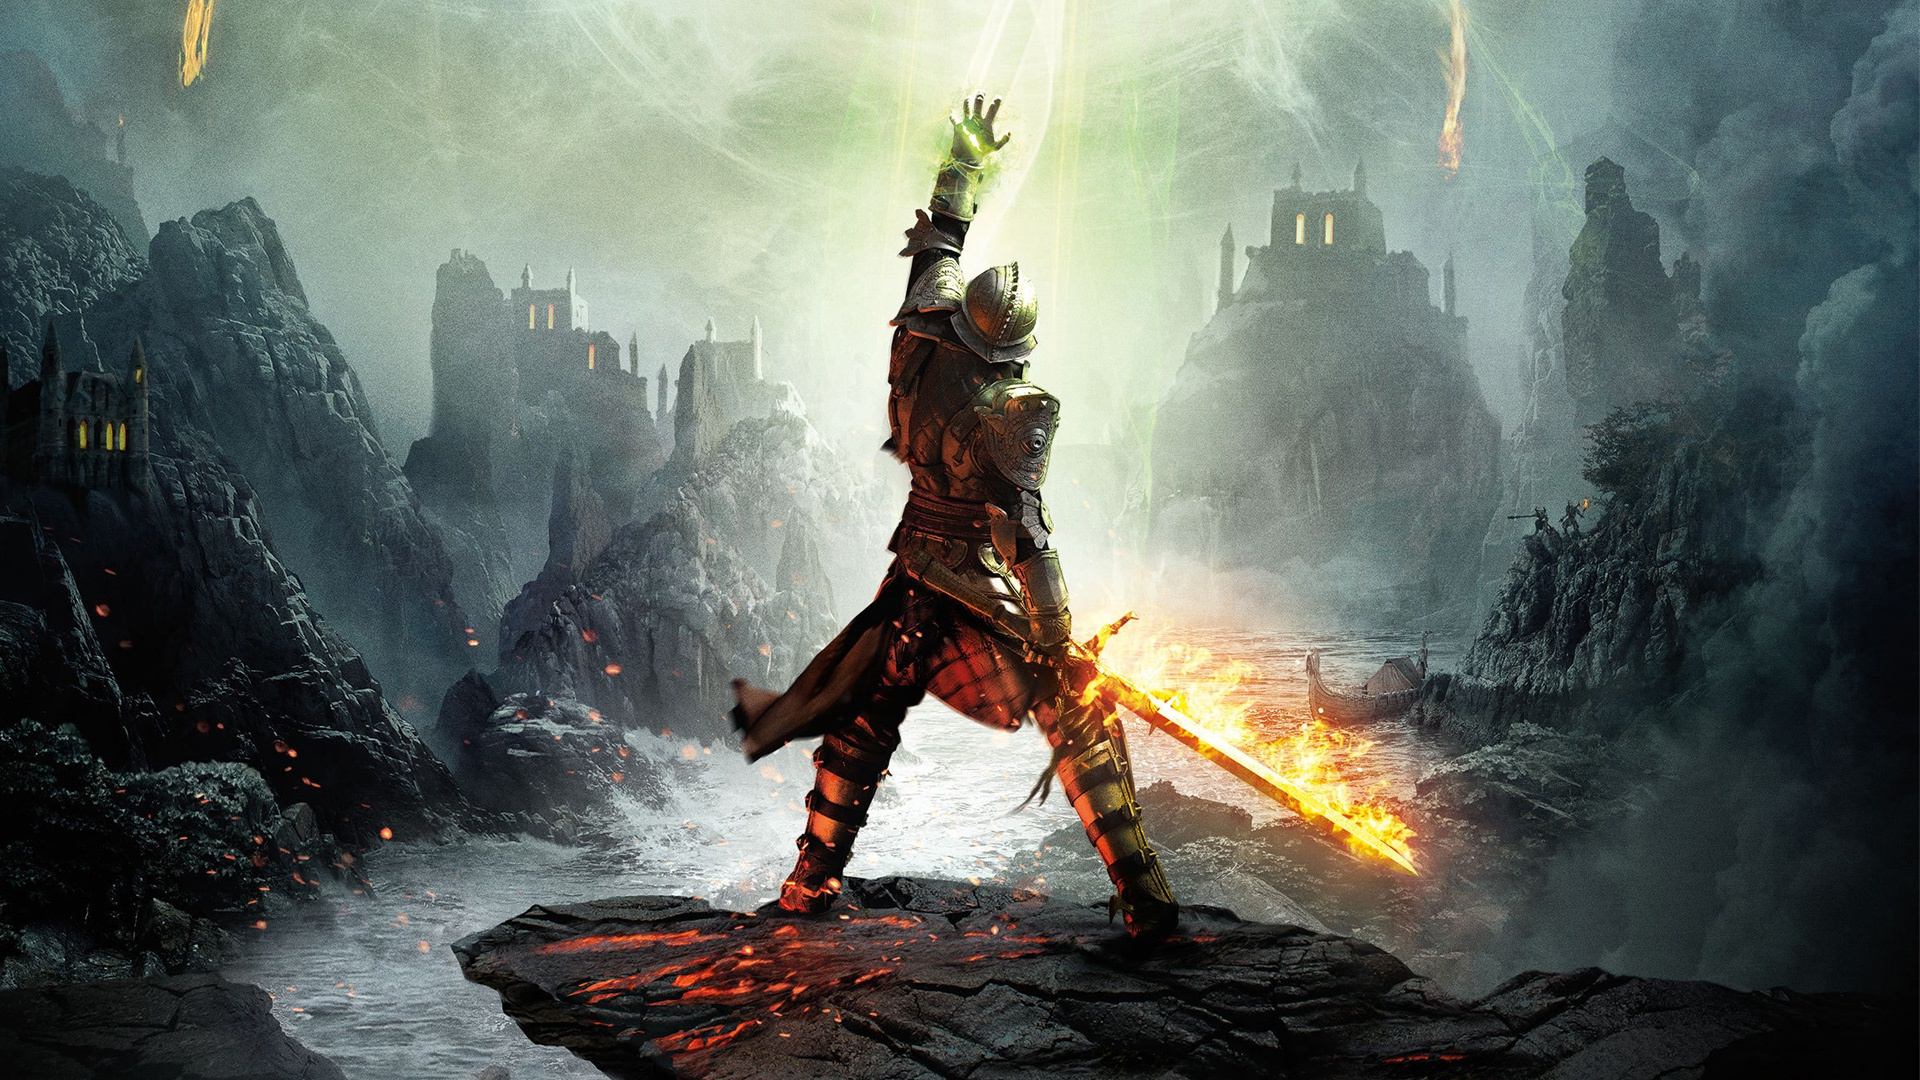 dragon-age-inquisition-game-wallpaper-140935434723_76dc.1920.jpg